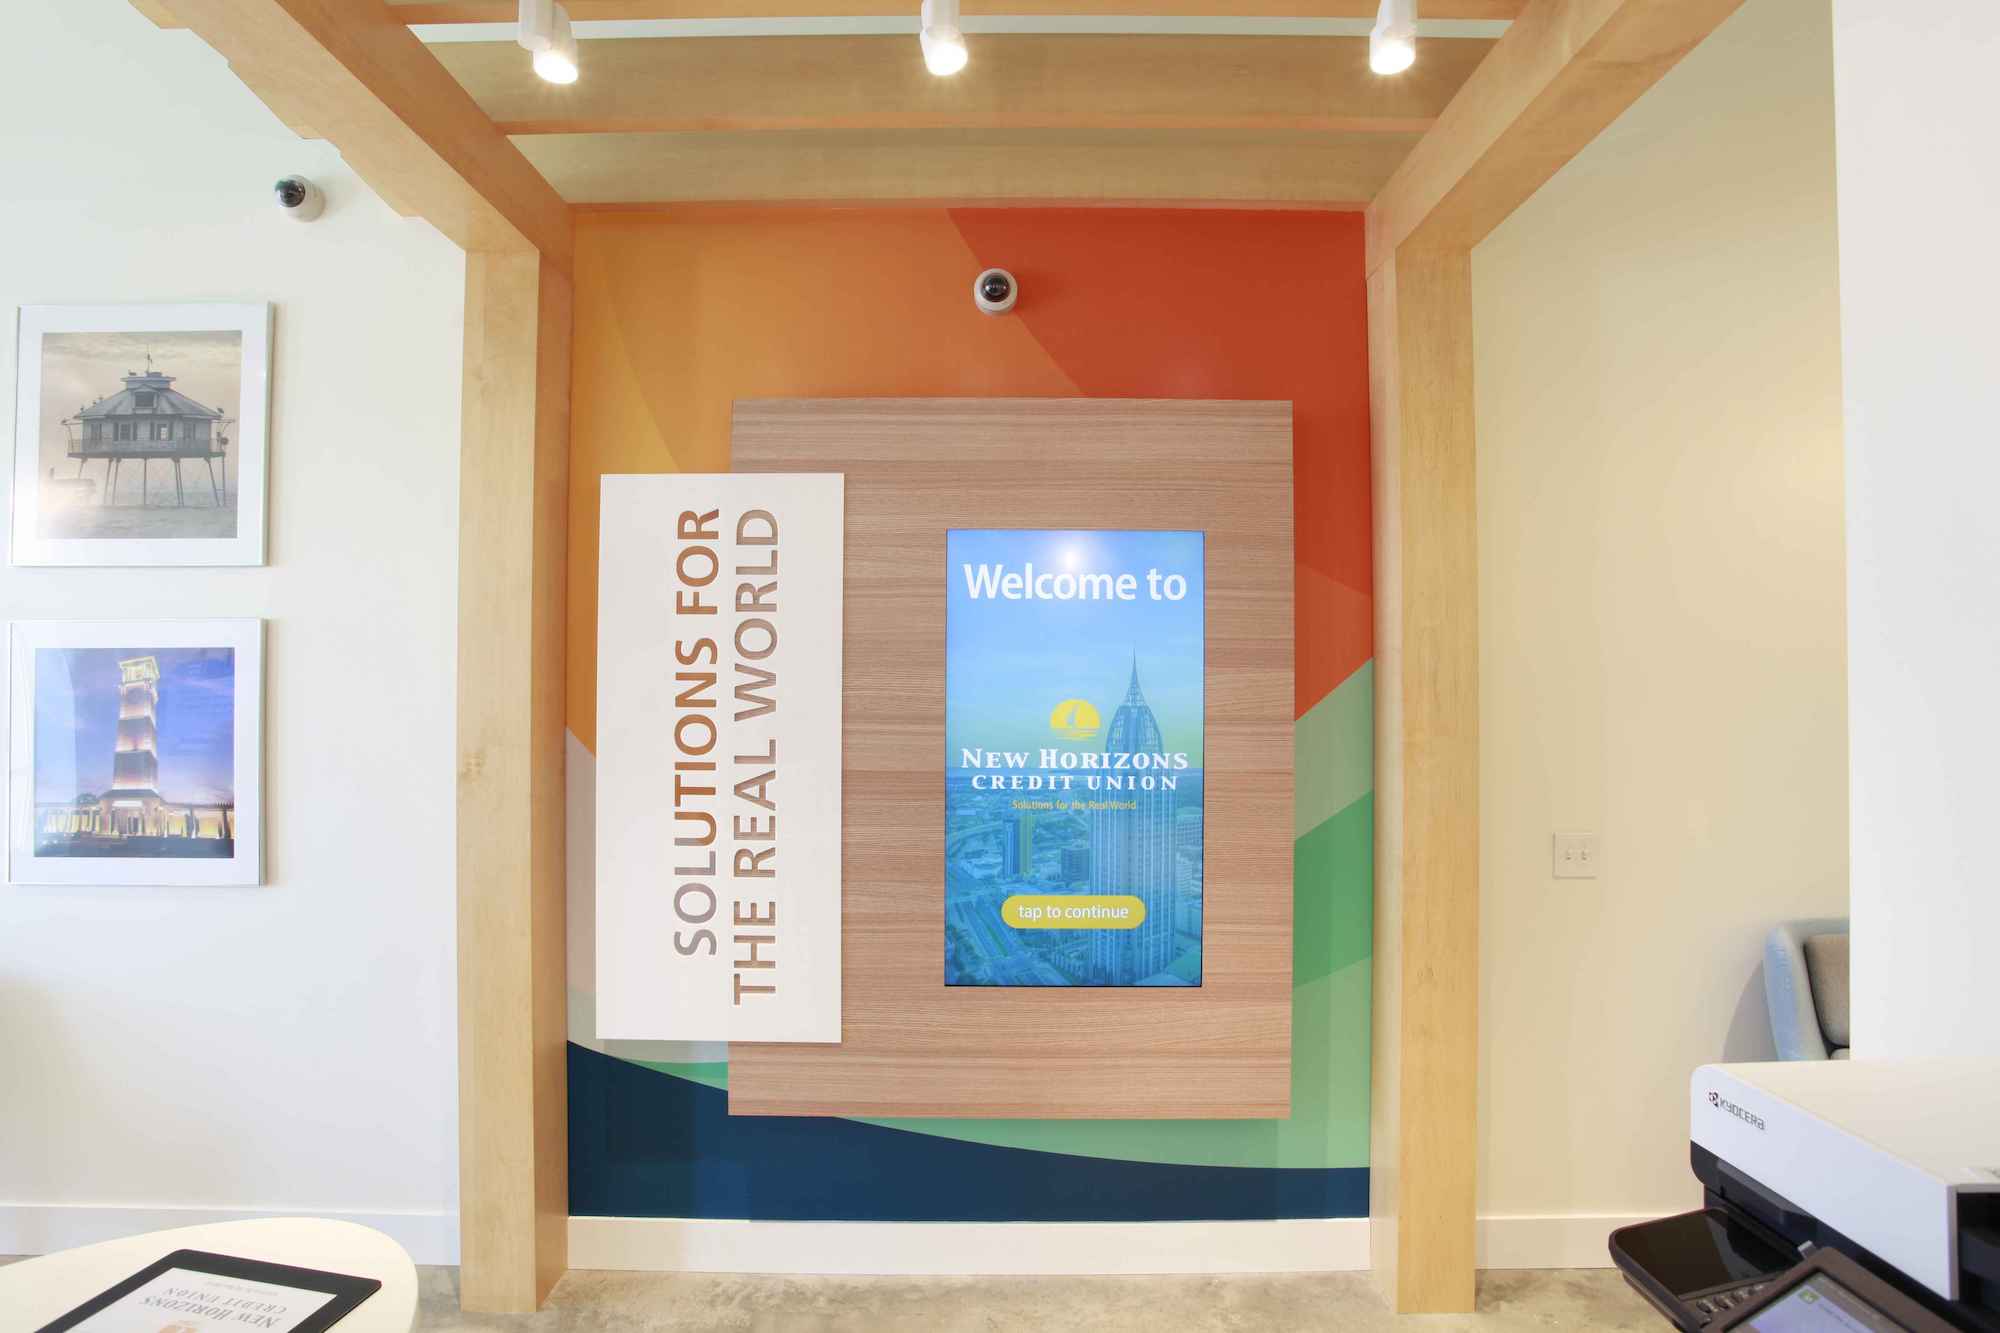 A wall featuring broad abstract stripes of orange, light green, and deep blue, a panel of blond wood, and a white sign reading “Solutions for the real world,” the New Horizons tagline. The wood panel contains a recessed video screen displaying the words “Welcome to New Horizons Credit Union” and a yellow button that says “Tap to continue.”